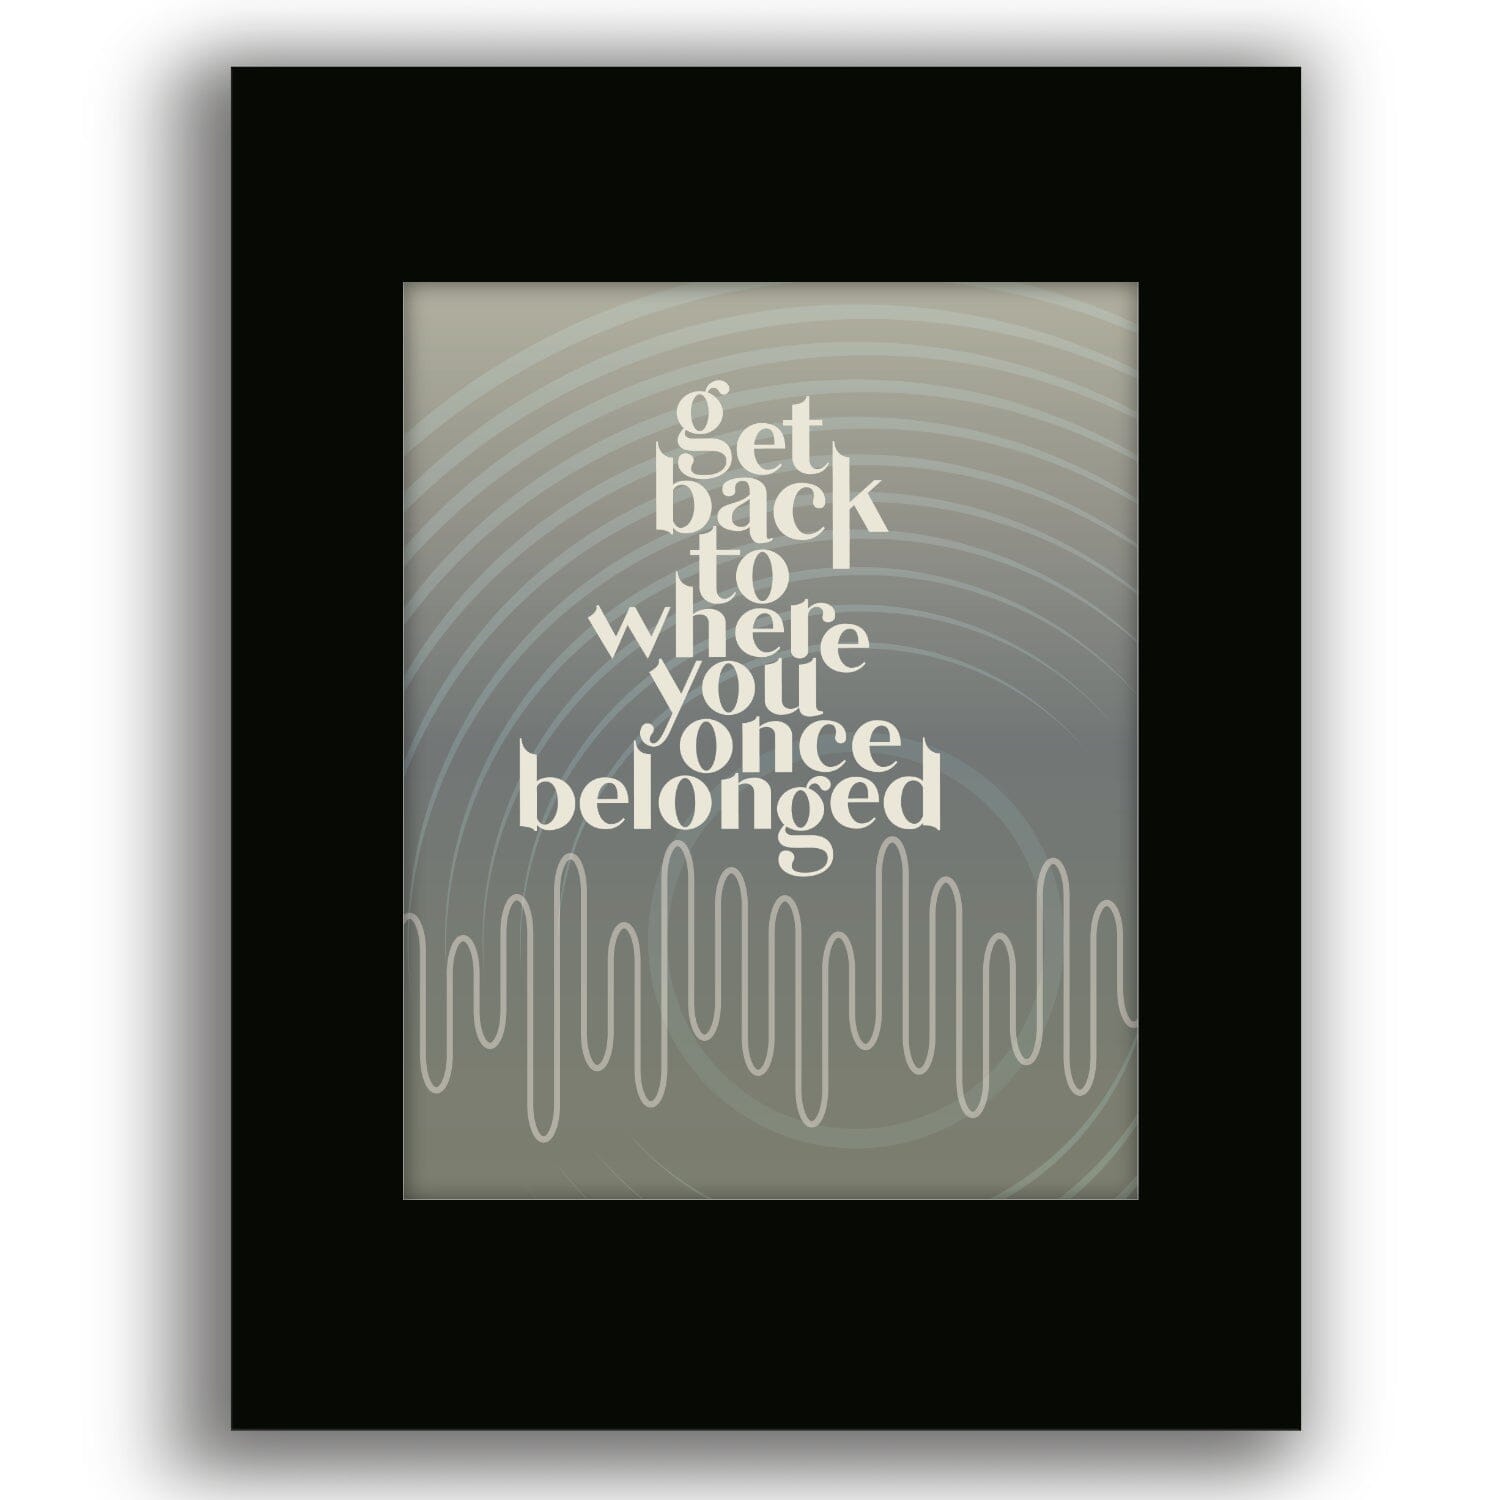 Get Back by the Beatles - Song Lyrics Music Art Print Poster Song Lyrics Art Song Lyrics Art 8x10 Black Matted Print 